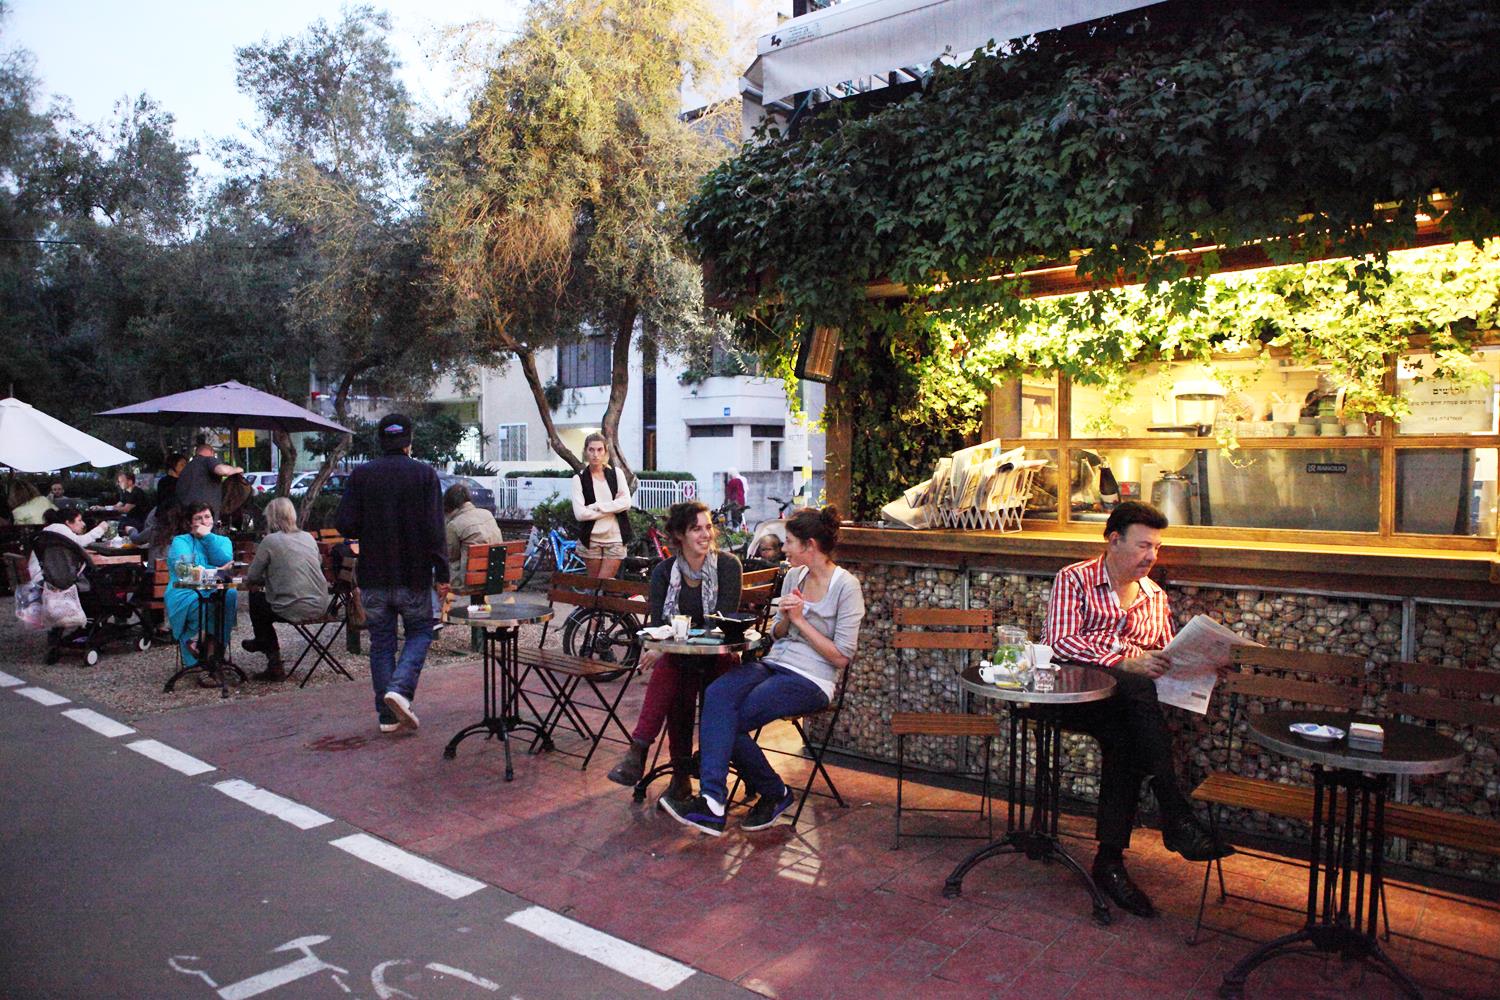 A popular day-to-night hangout on Ben Gurion Boulevard. Image by Dan Porges/Archive Images/Getty Images